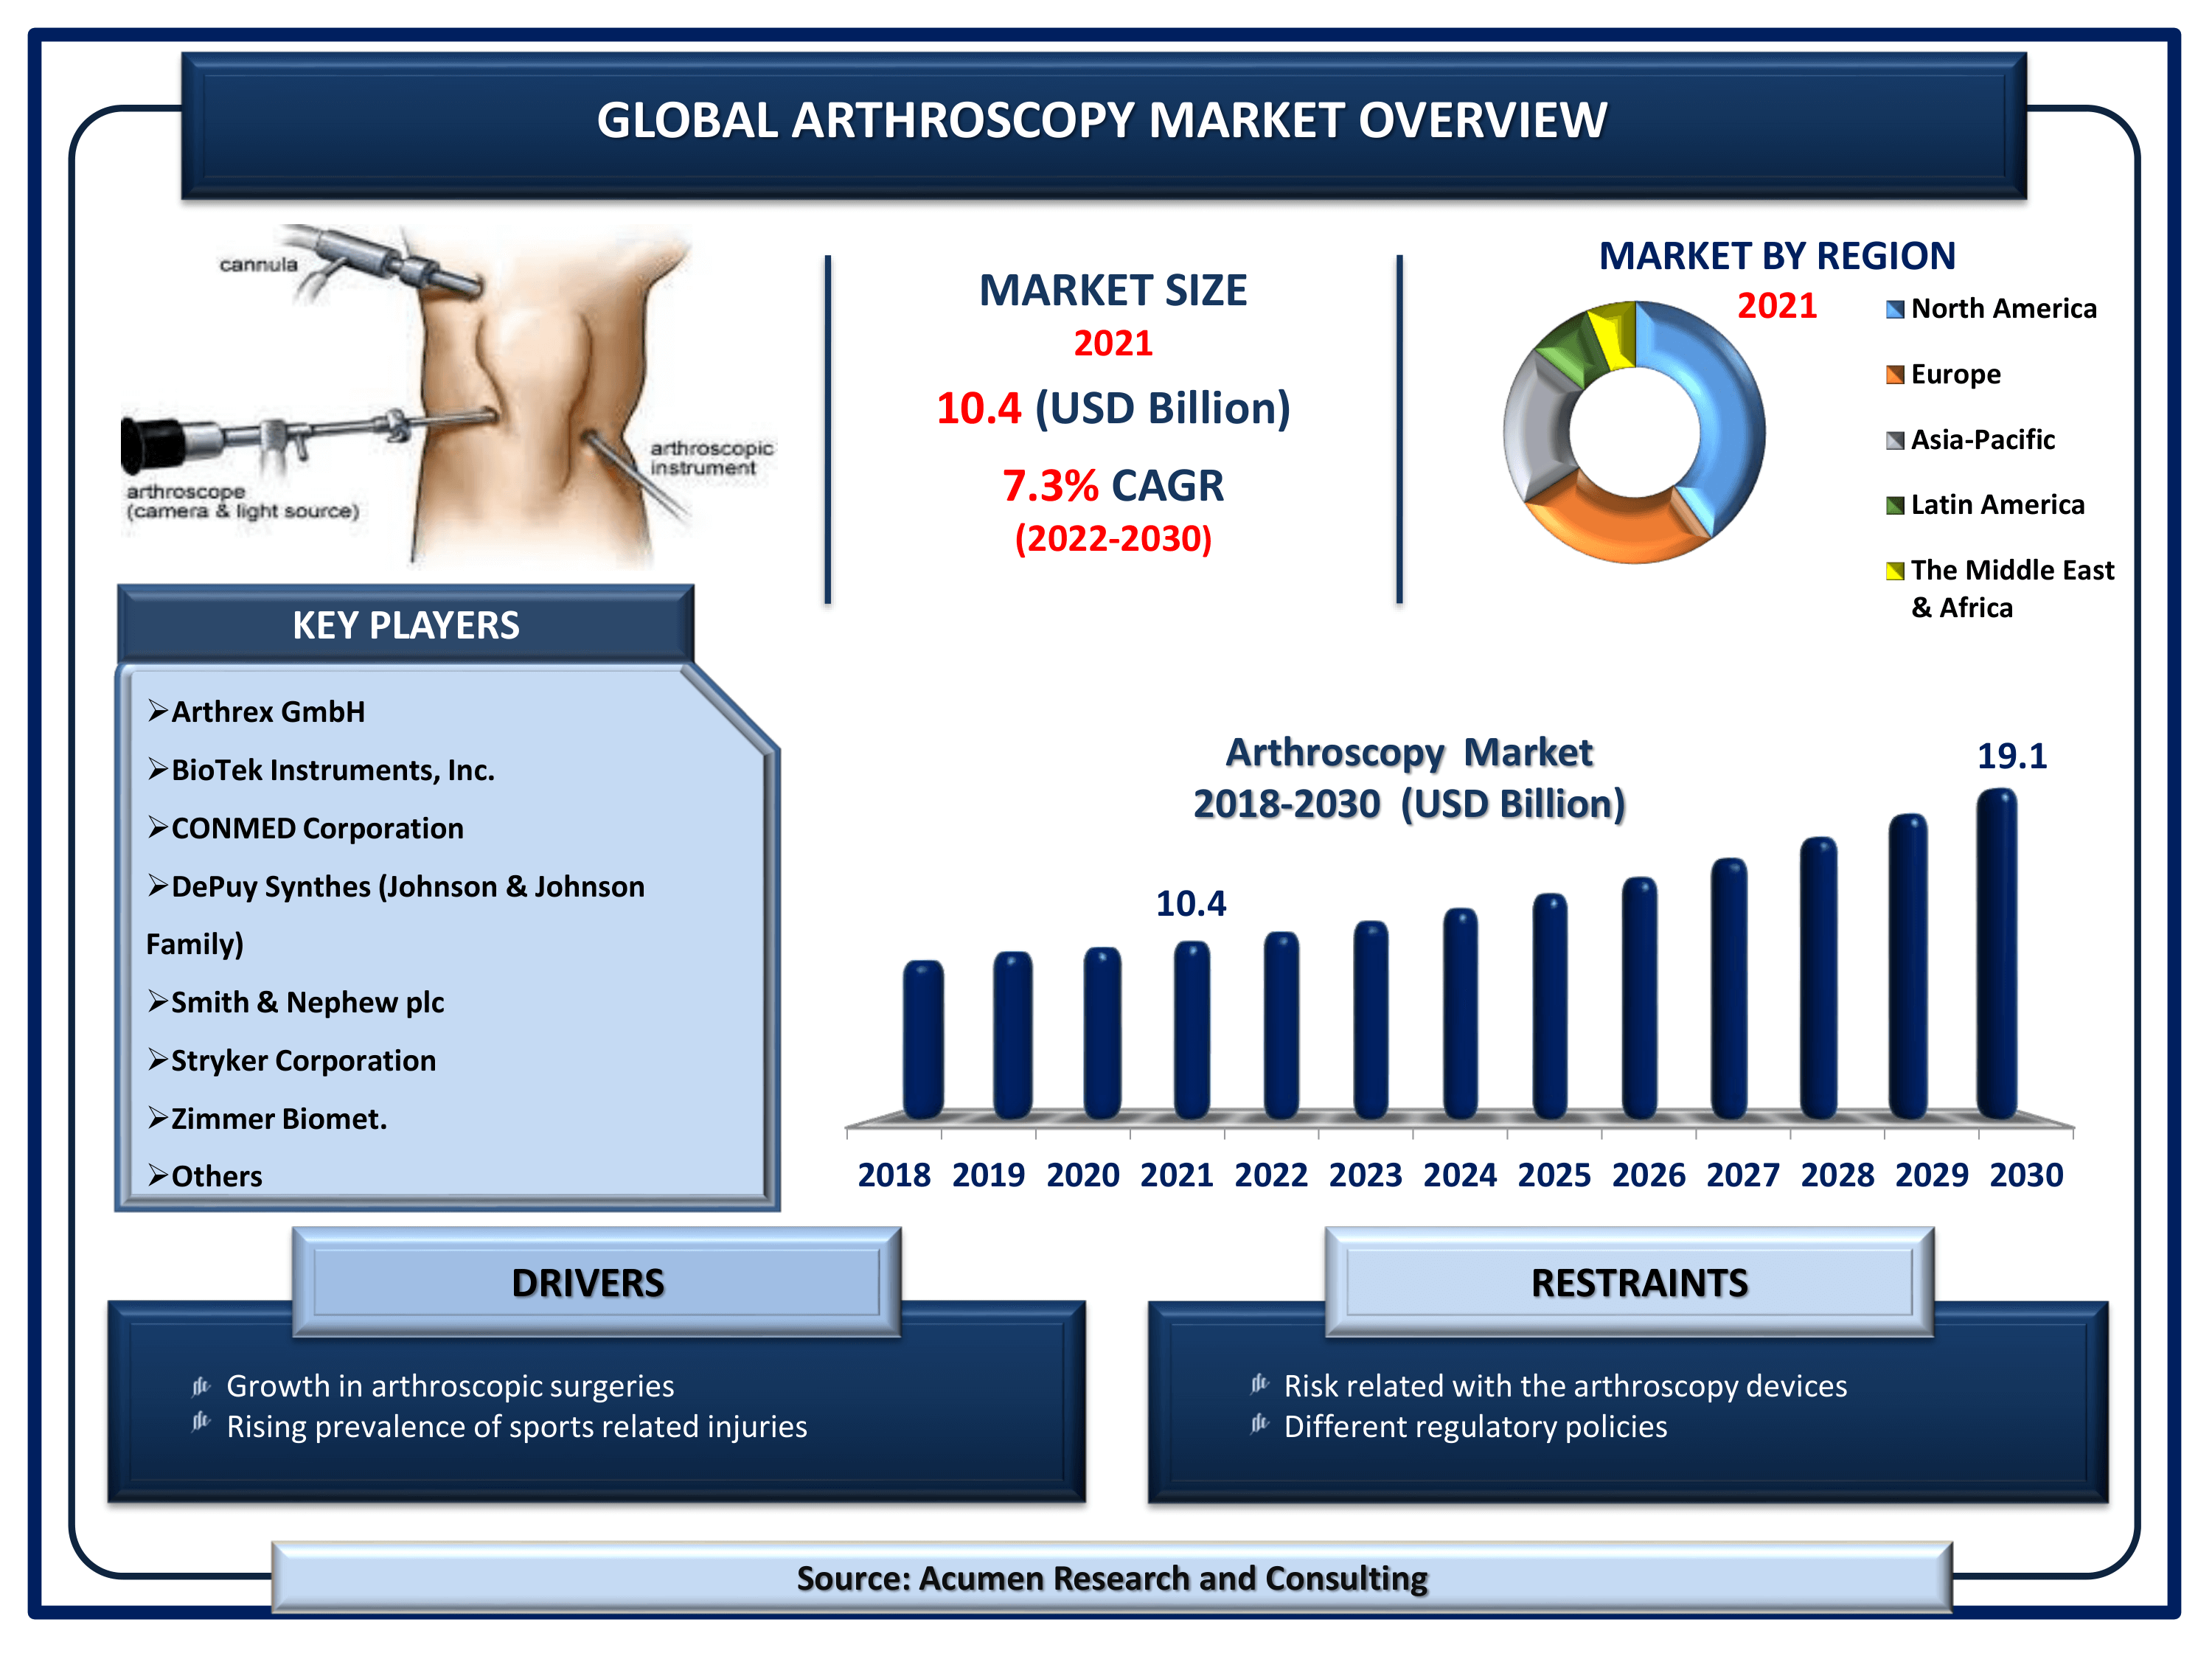 Global arthroscopy market revenue is estimated to reach USD 19.1 Billion by 2030 with a CAGR of 7.3% from 2022 to 2030